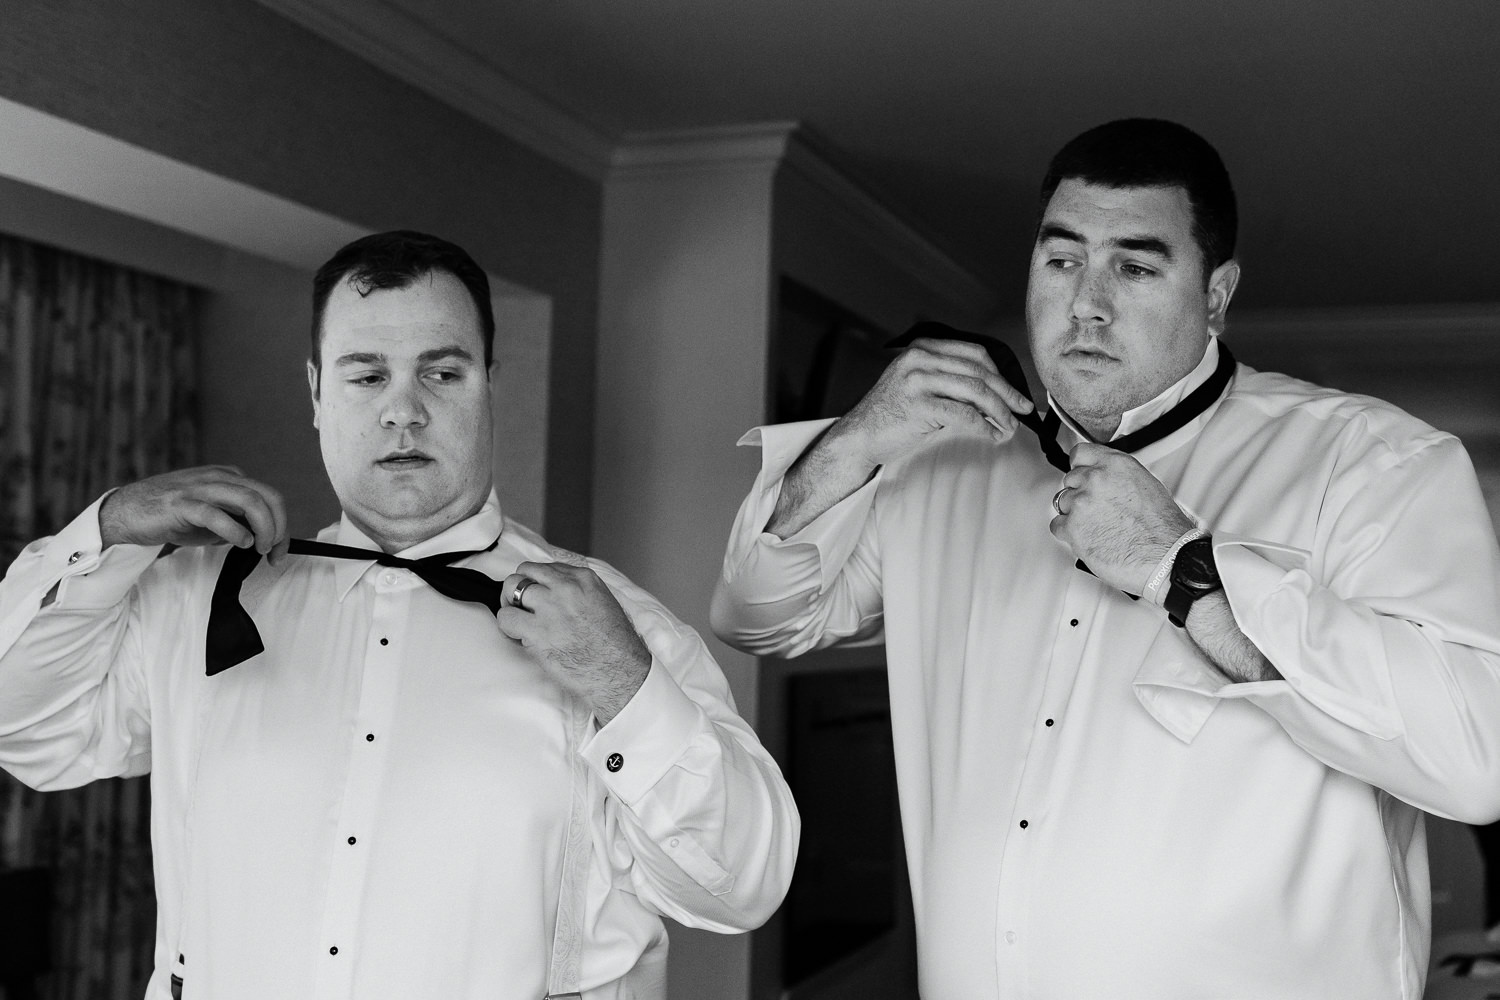 Groom and groomsman at Stage Neck Inn wedding in York Maine